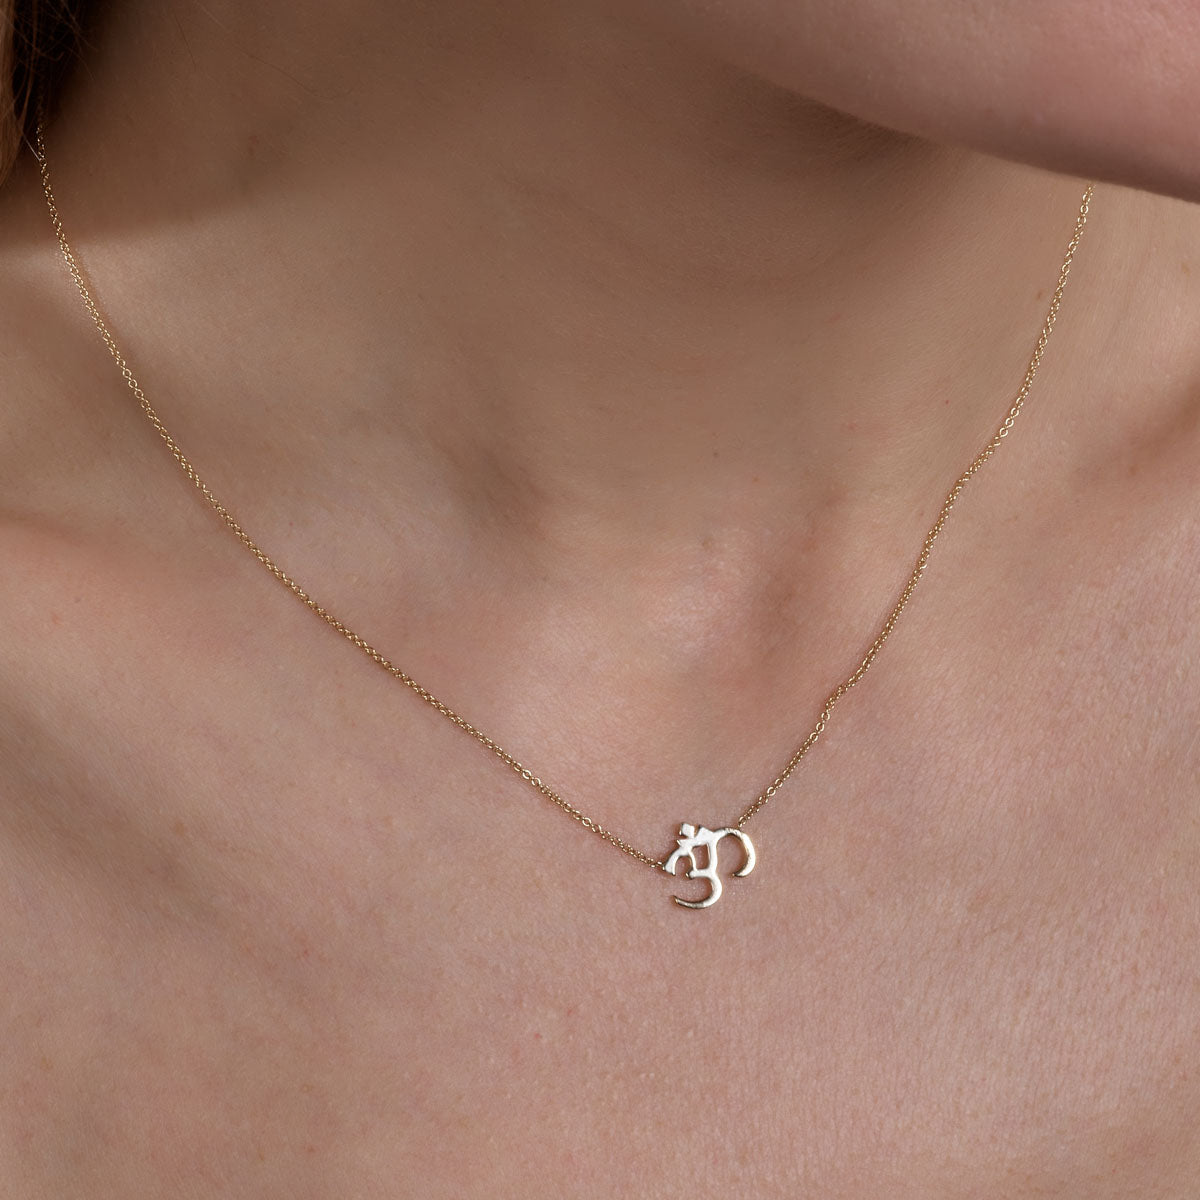 gold om necklace on womans neck